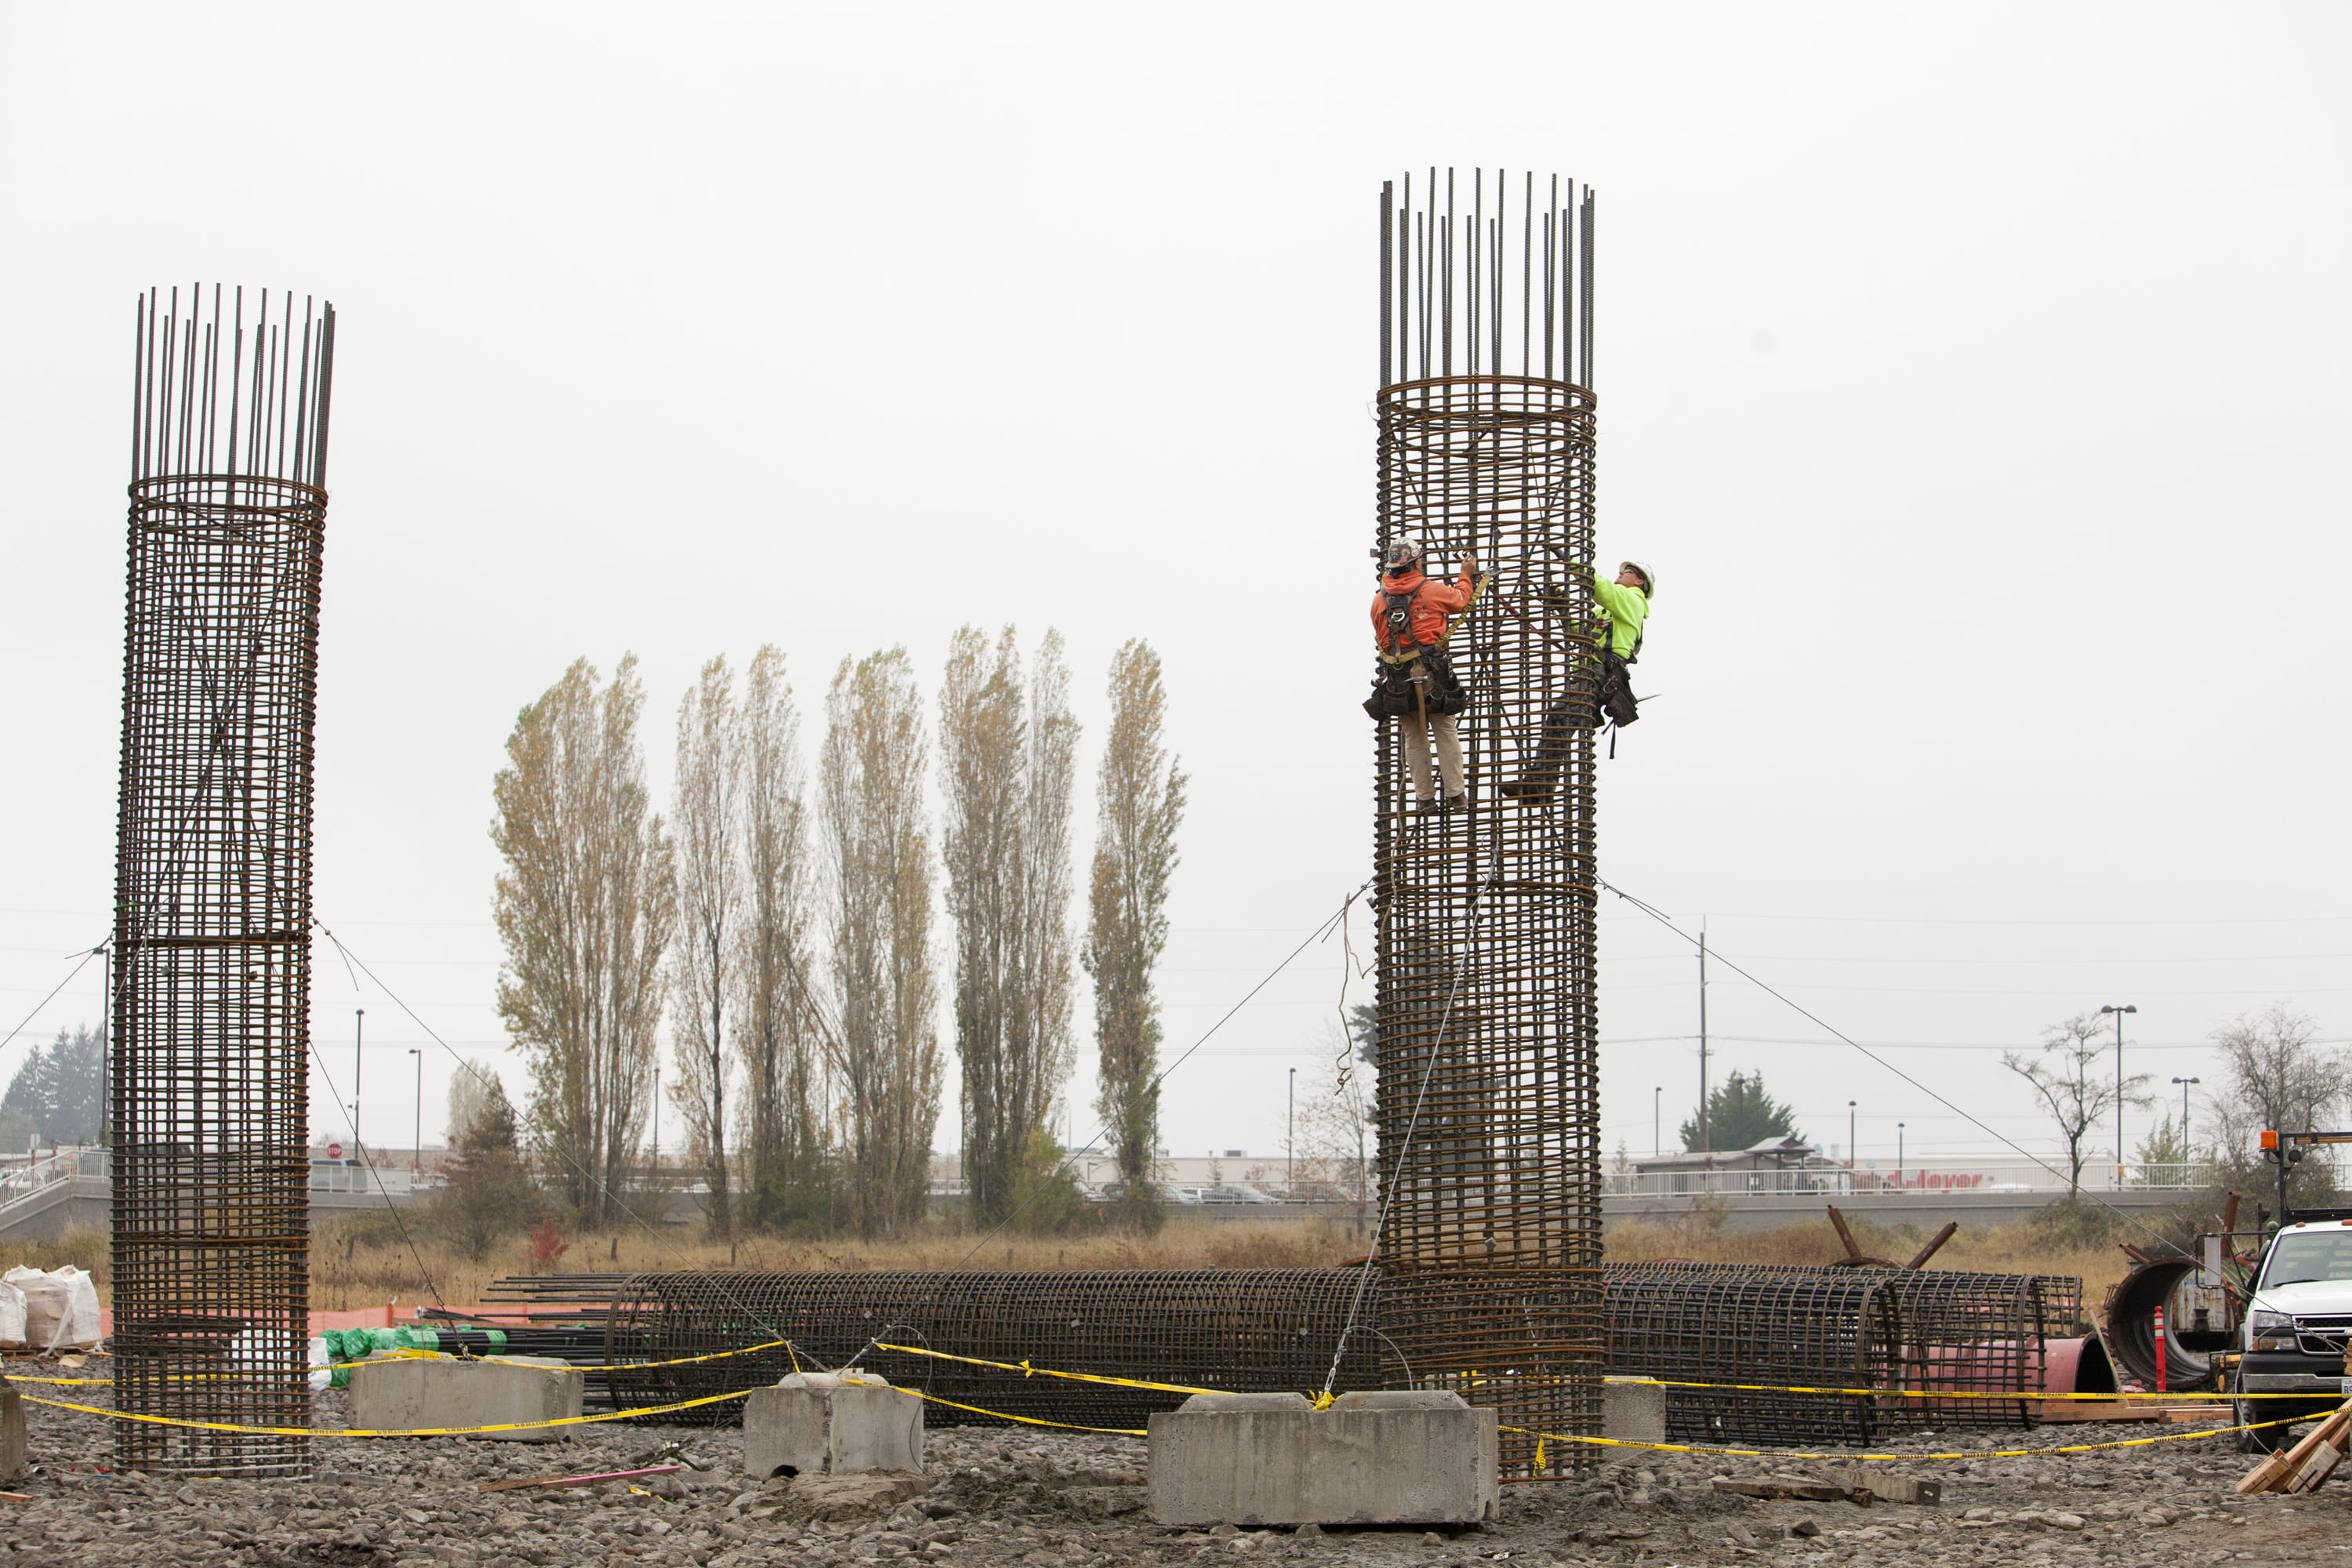 Construction crews work on rebar cages for bridge supports as part of the Salmon Creek Interchange Project.